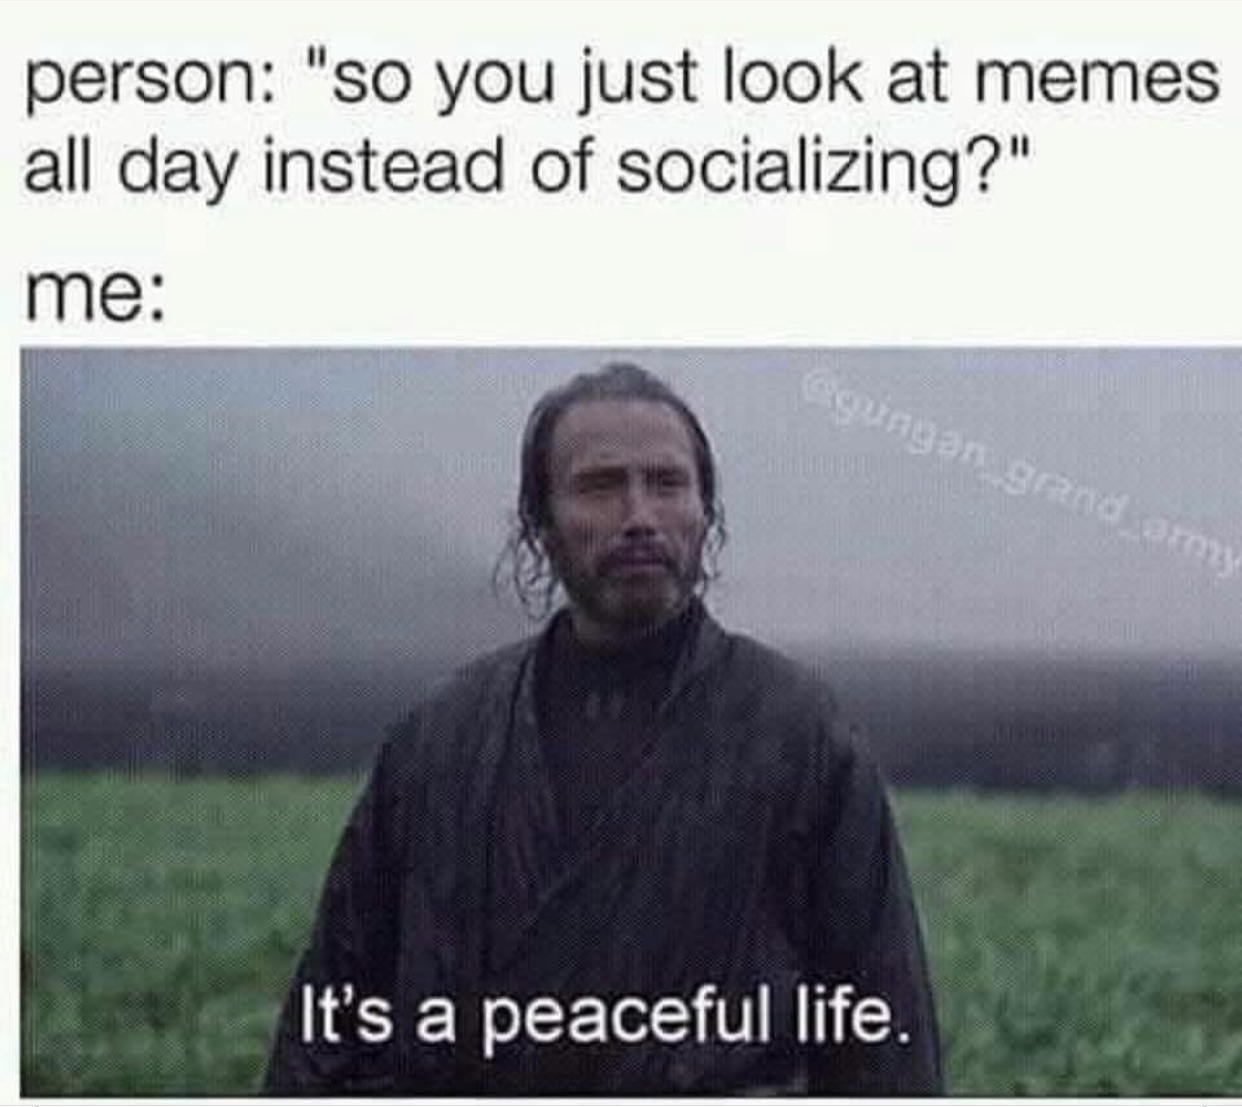 so you just look at memes all day - person "so you just look at memes all day instead of socializing?" me zoungan grand army It's a peaceful life.